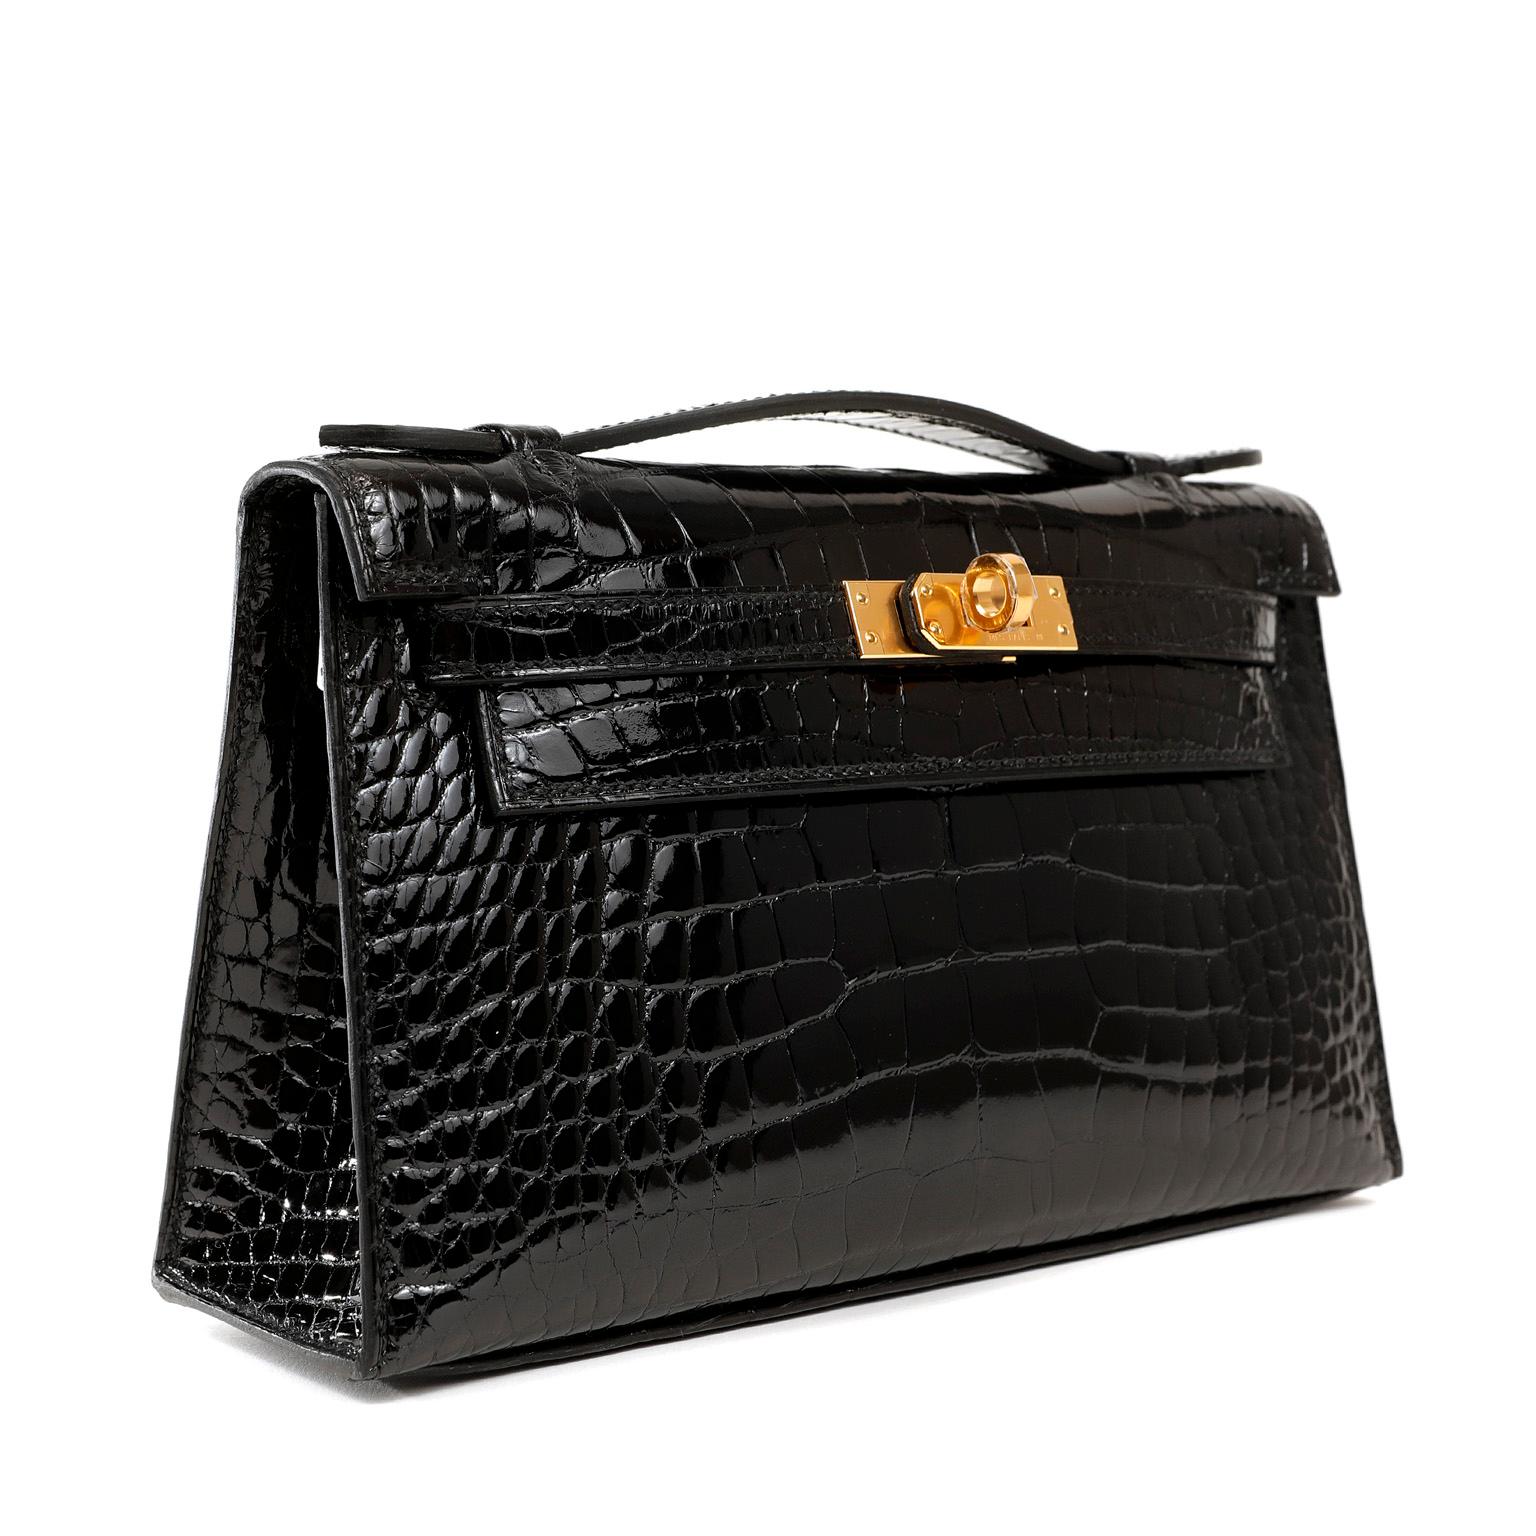 This authentic Hermès Black Crocodile Kelly Pochette is in pristine unworn condition with the protective plastic on the gold hardware. A clutch version of the classic Kelly, it has a stable base allowing it to stand upright and easily carries all